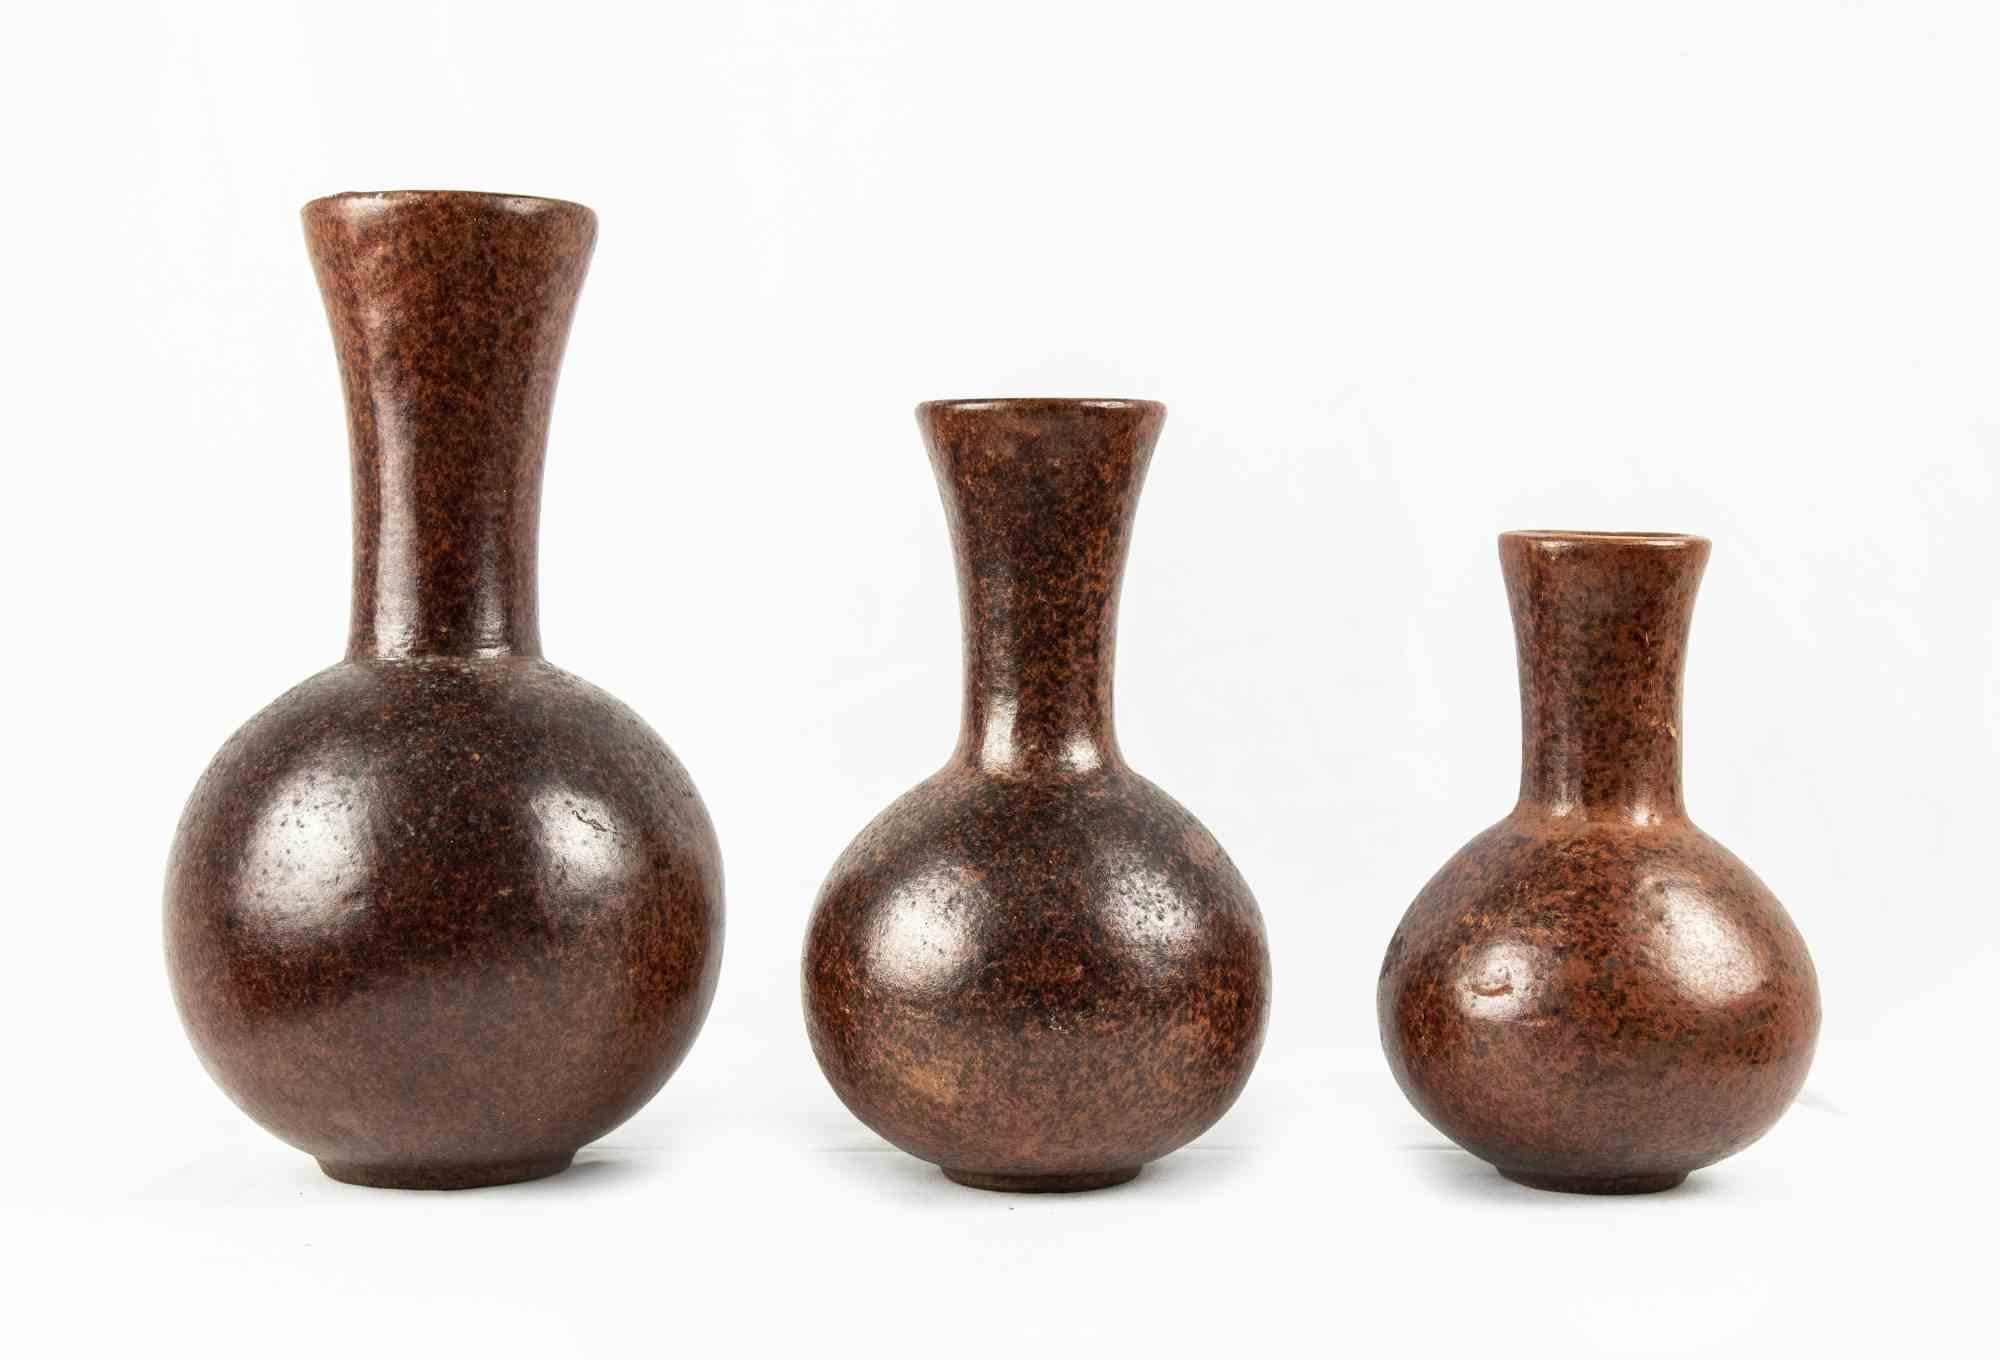 These three vintage vases were realized in the 1970s.

Original stone with marbled decorated Surface.

Made in Italy.

Various Dimensions: 30 x 16 cm; 24 x 14 cm; 20 x 12 cm.

Perfect conditions.